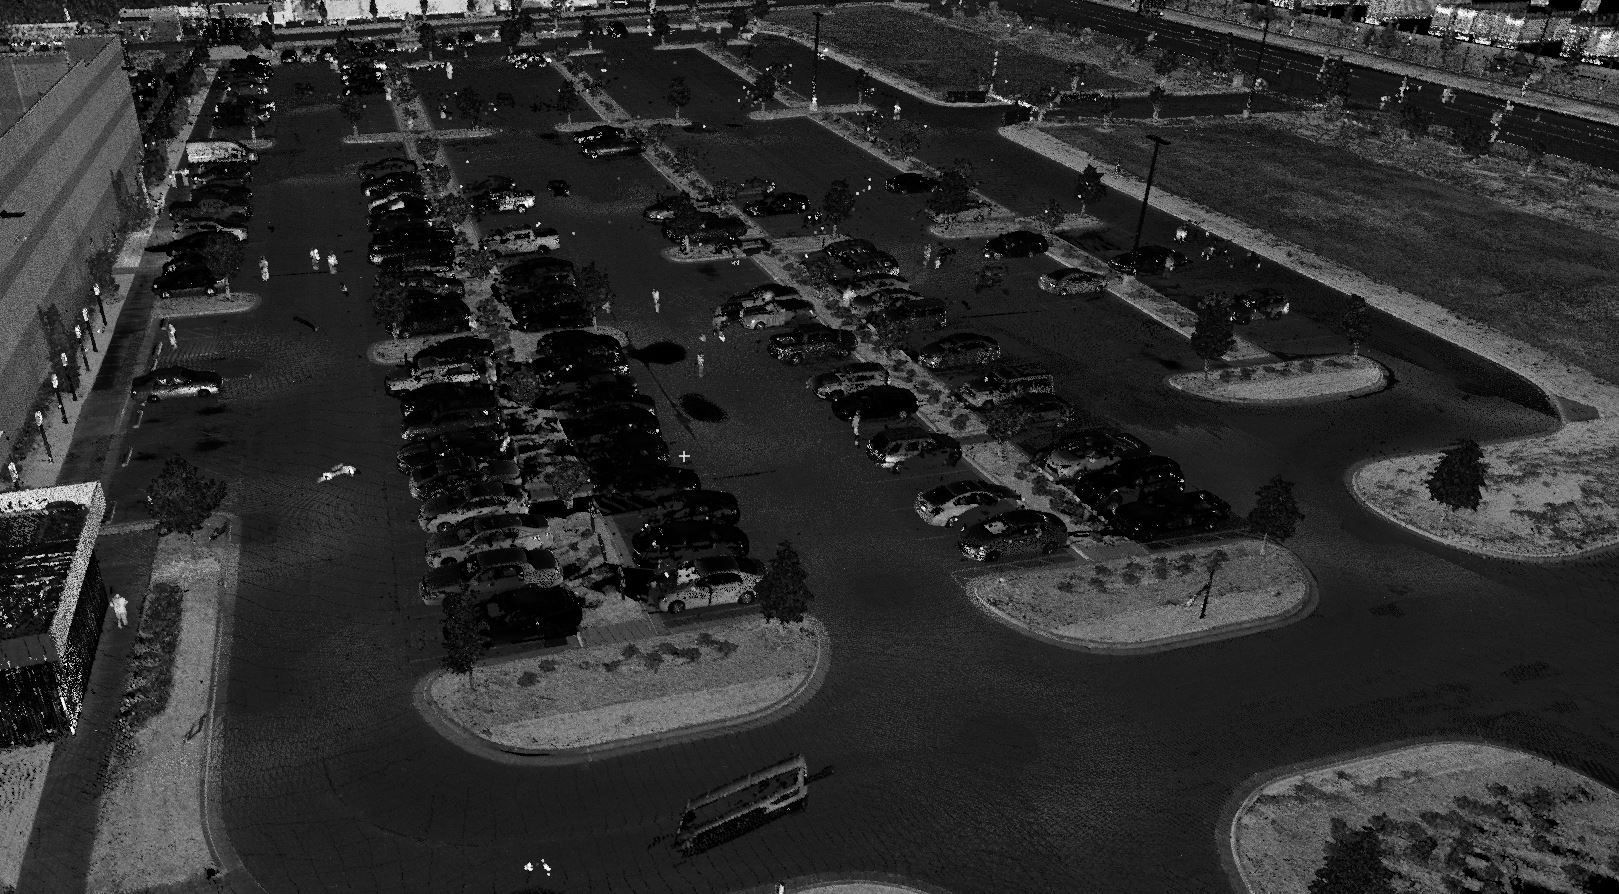 A black and white laser scanner image of the grounds of Goodyear Distribution Center.